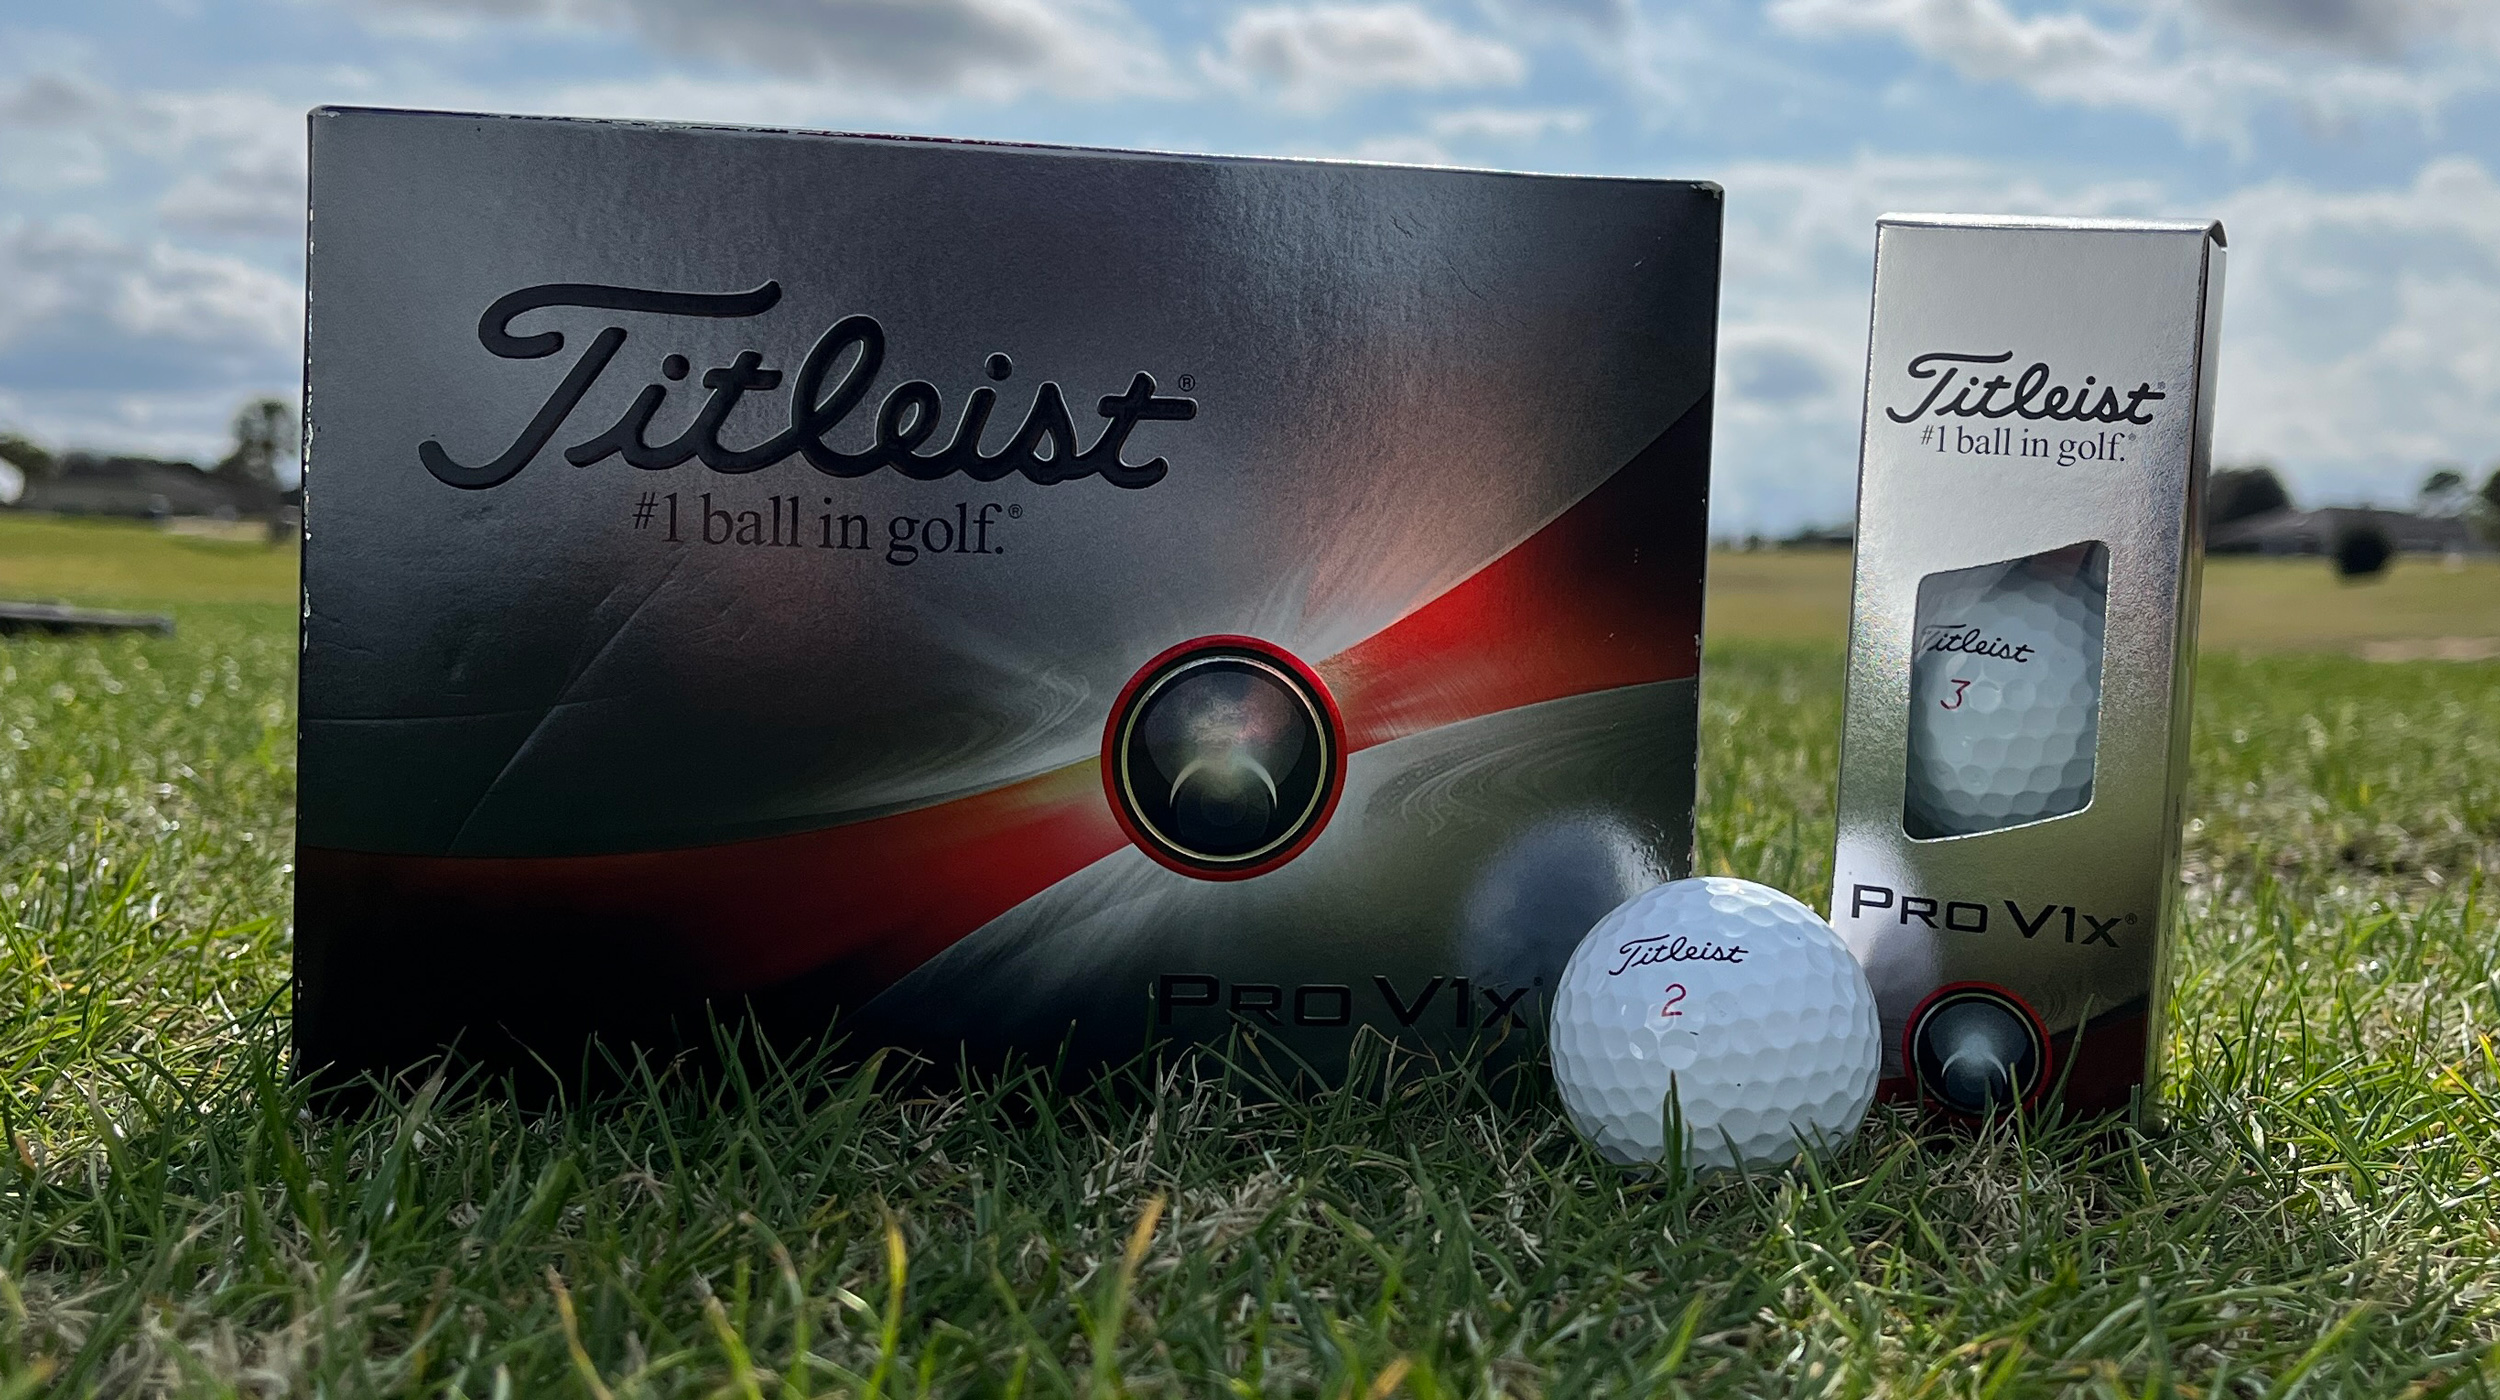 Titleist Pro V1 Golf Balls 2023 - Special Play Numbers